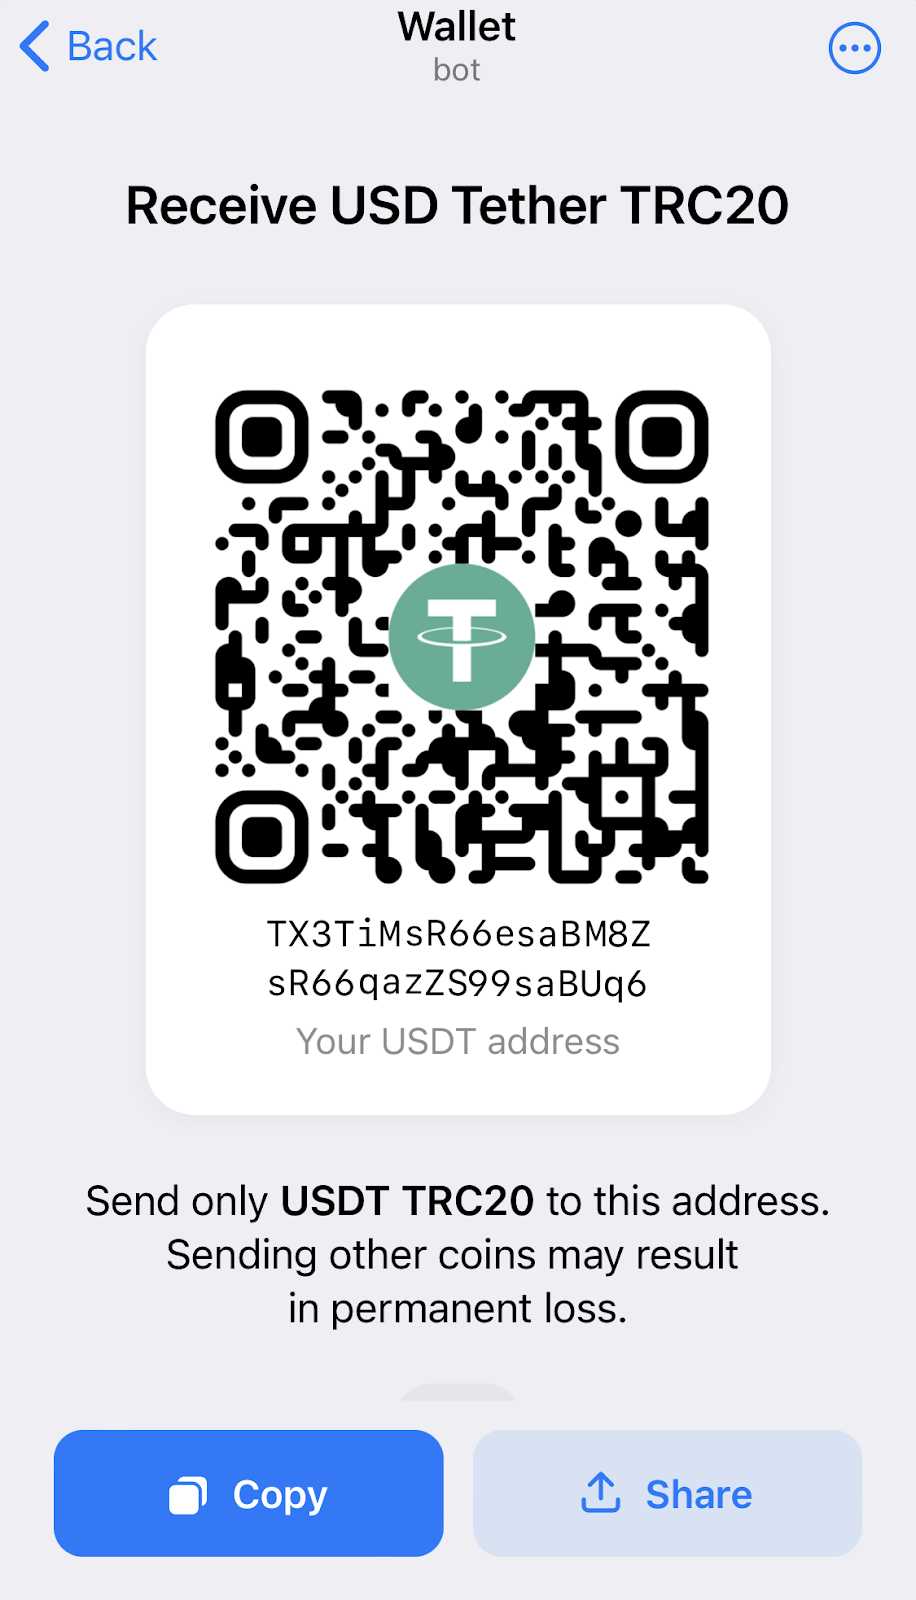 Section 3: Benefits of Using USDT for Wallet Transfers